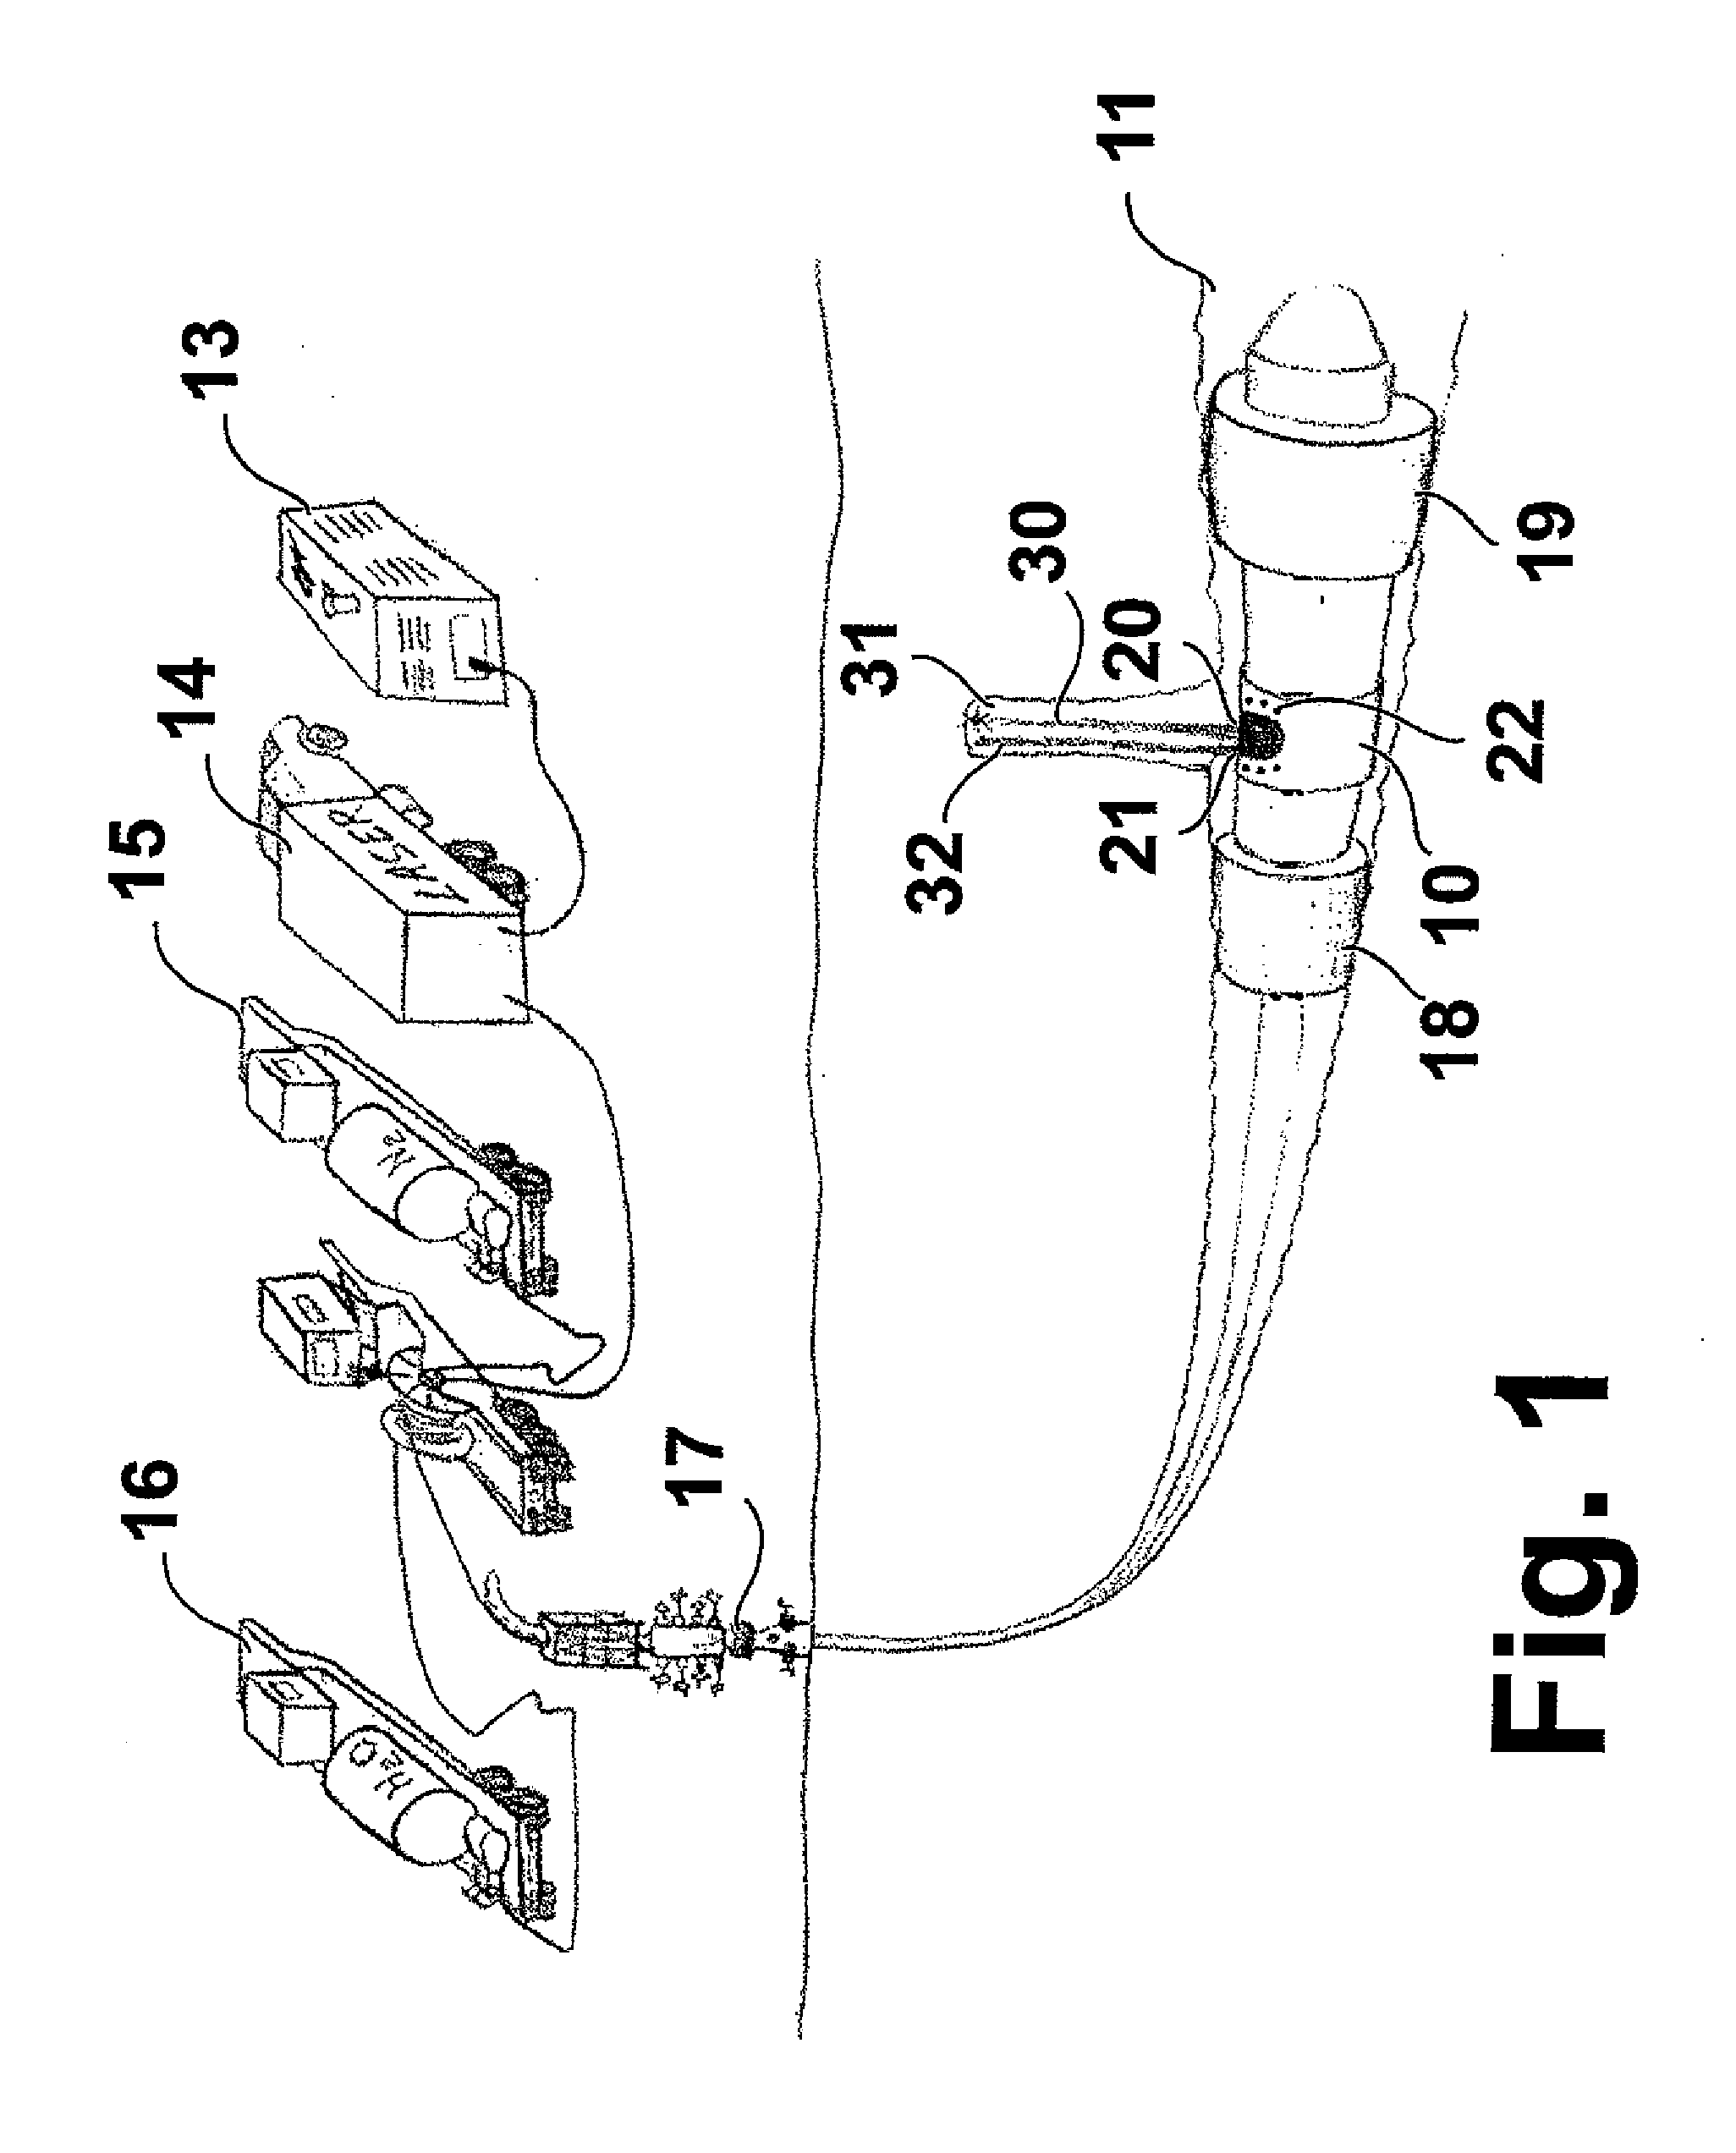 Method and apparatus for wellbore perforation